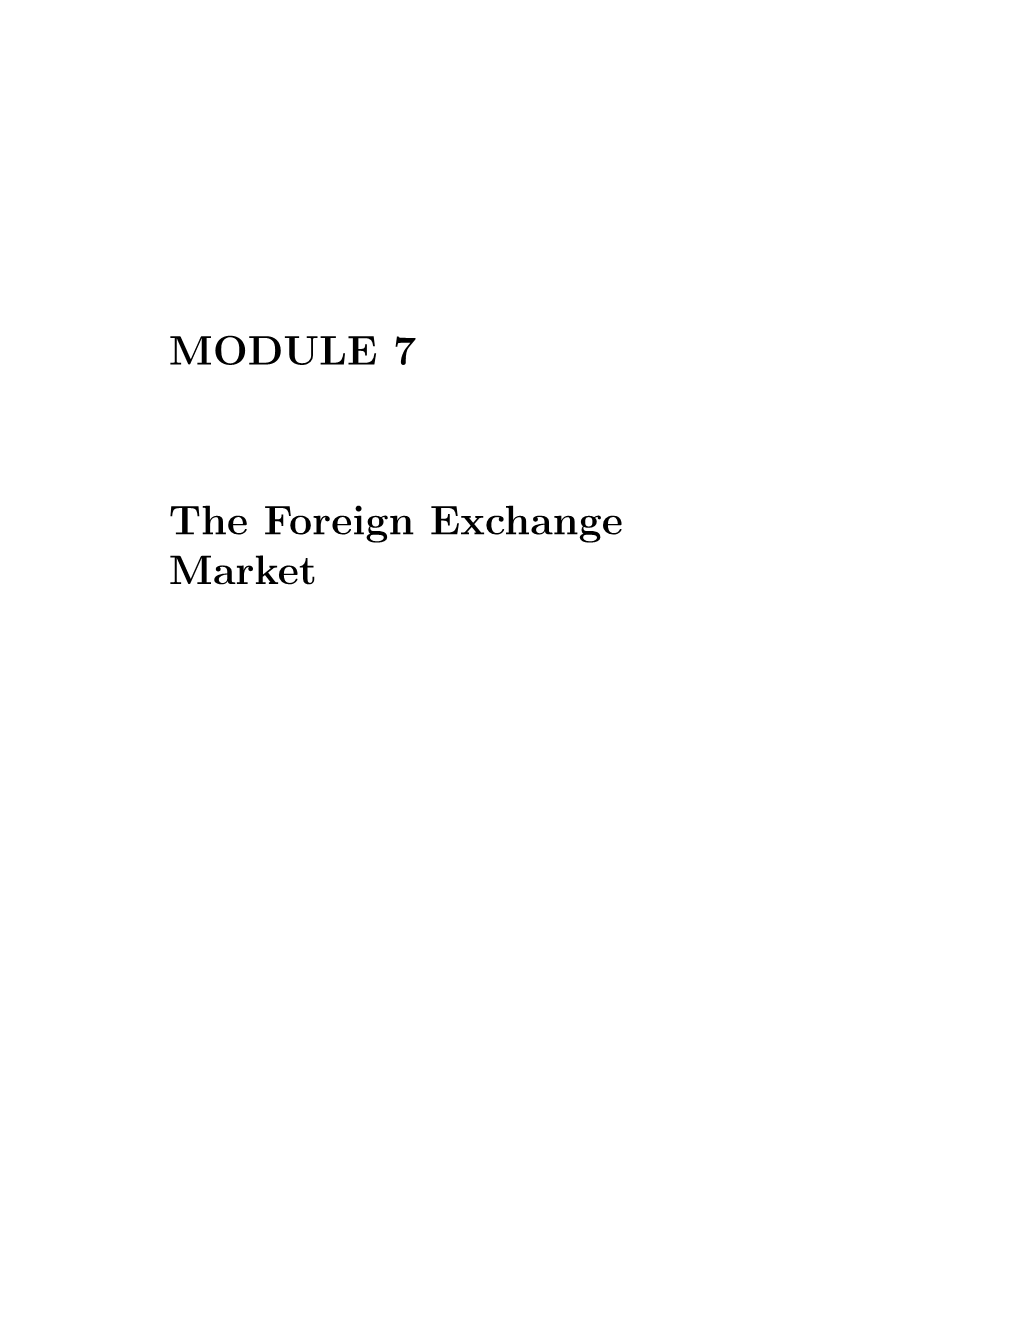 MODULE 7 the Foreign Exchange Market